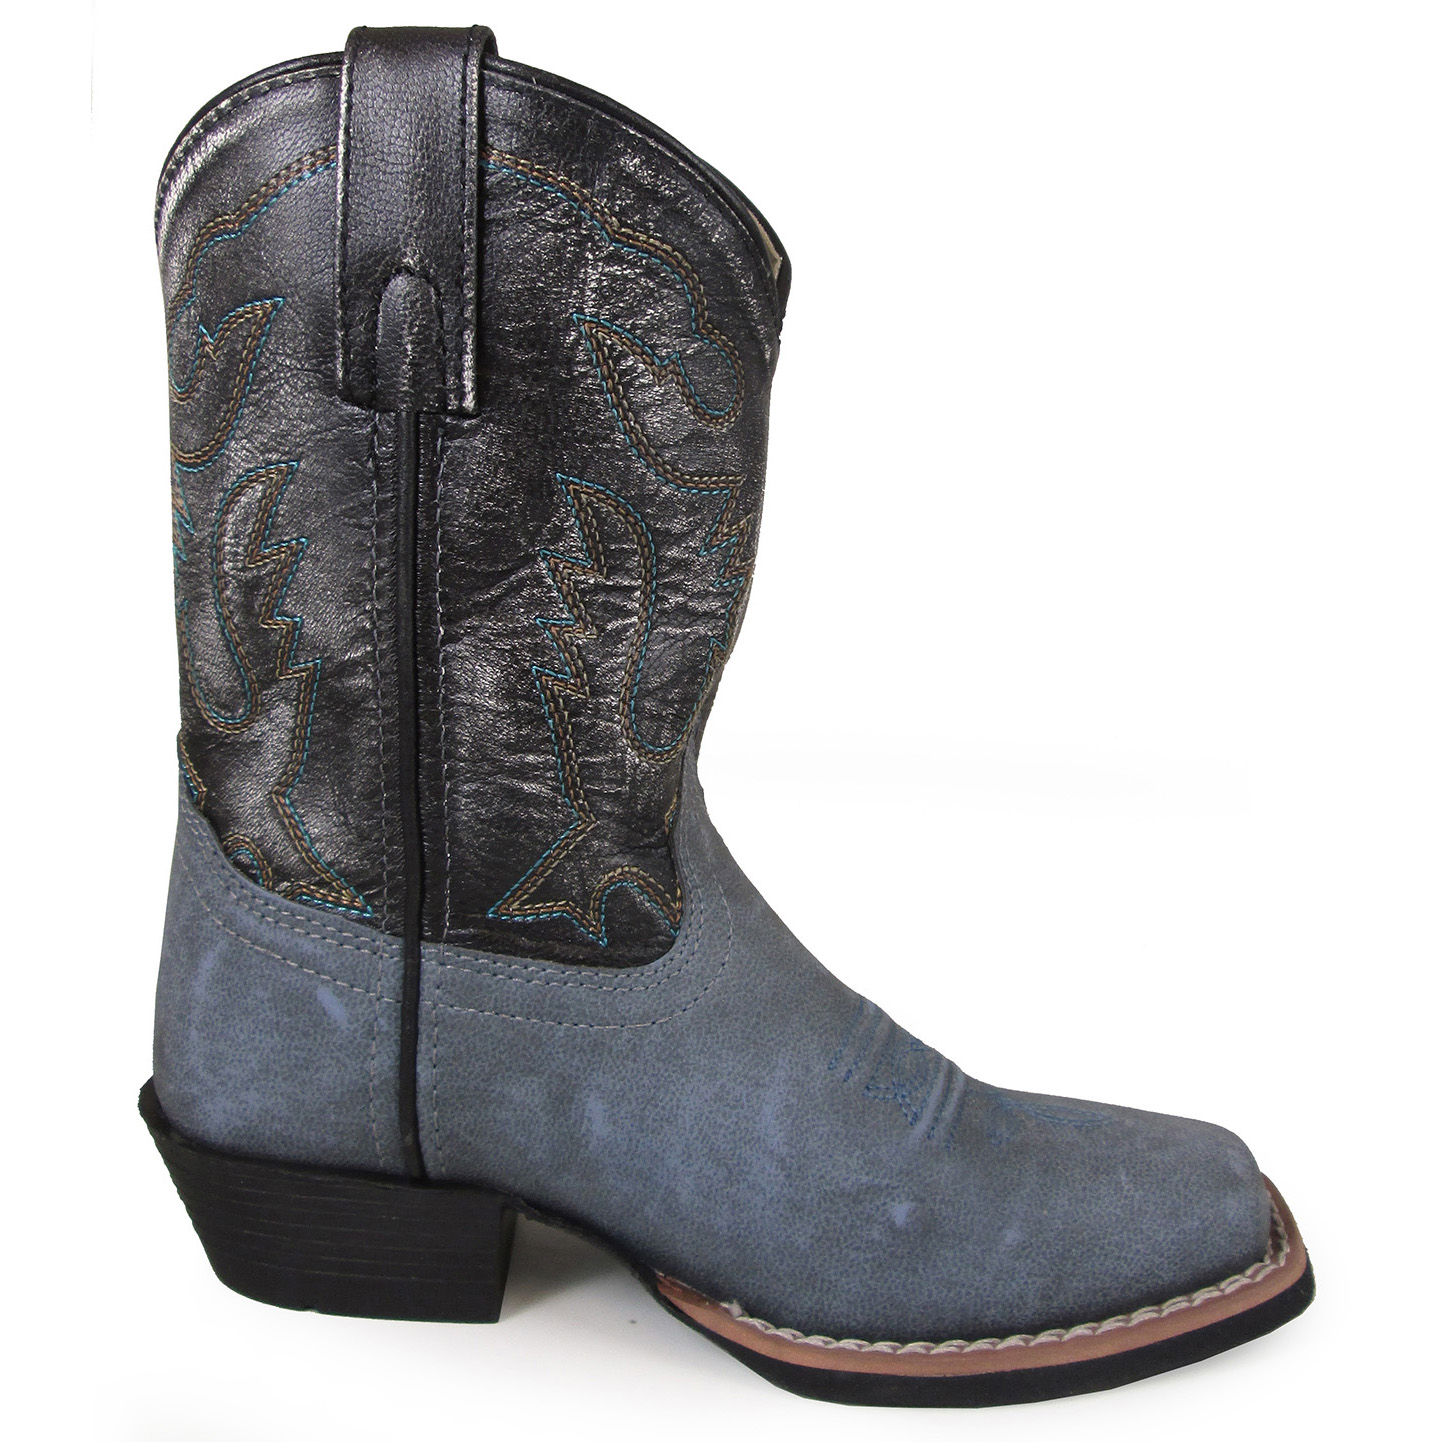 Smoky Mountain Boots Kid's Gallup Vintage Blue/Black Cowboy Boot